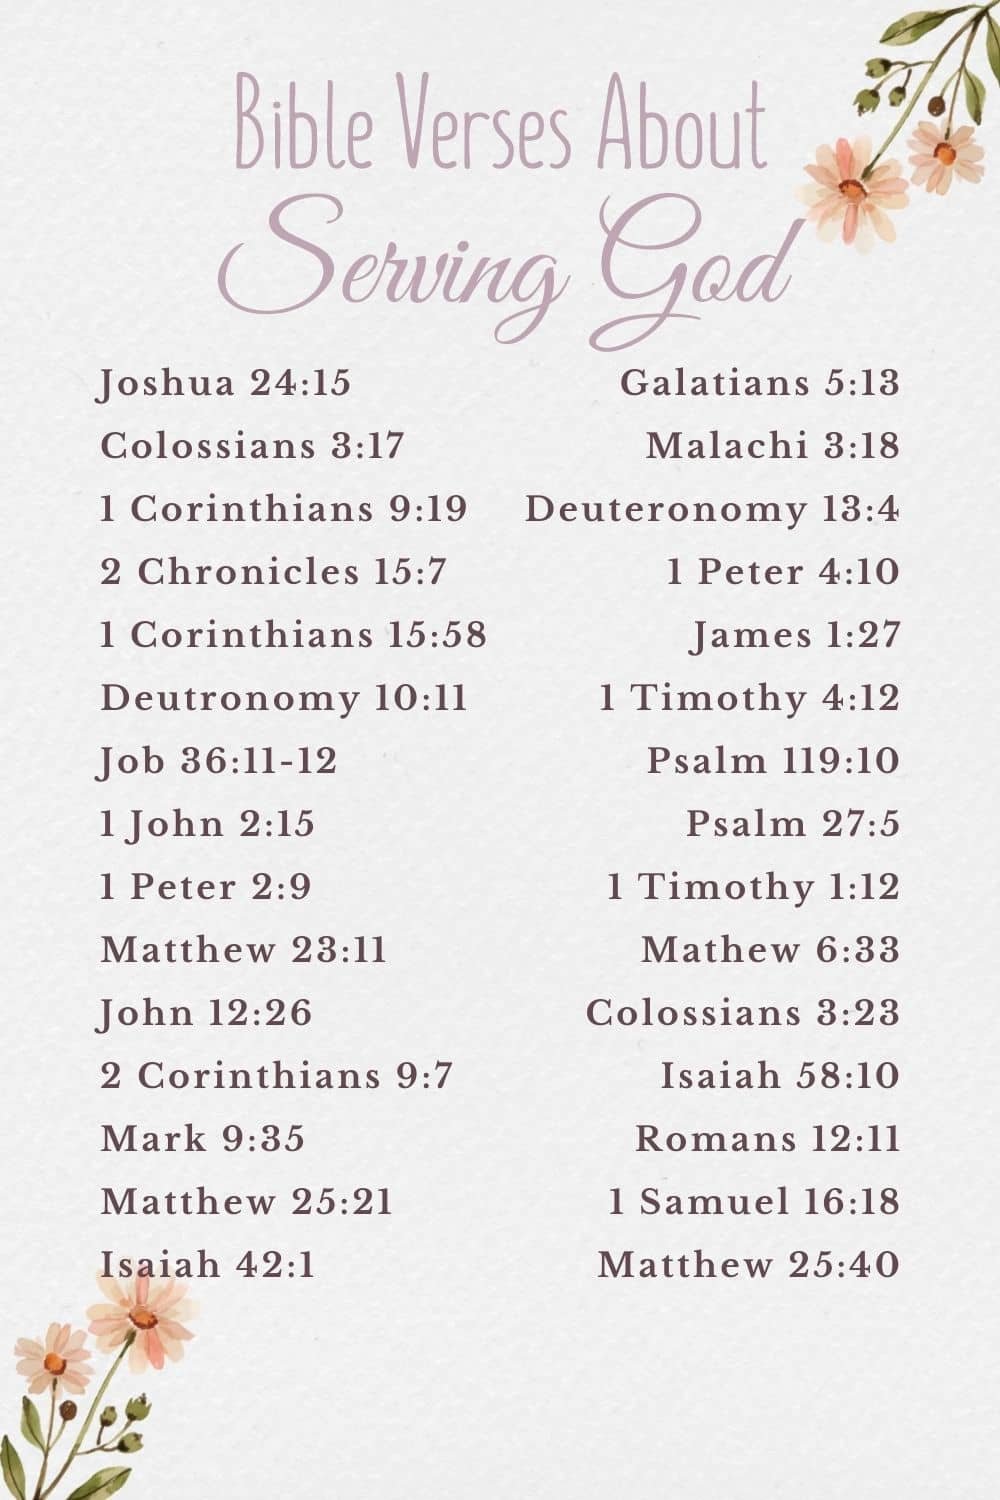 bible verses about serving God